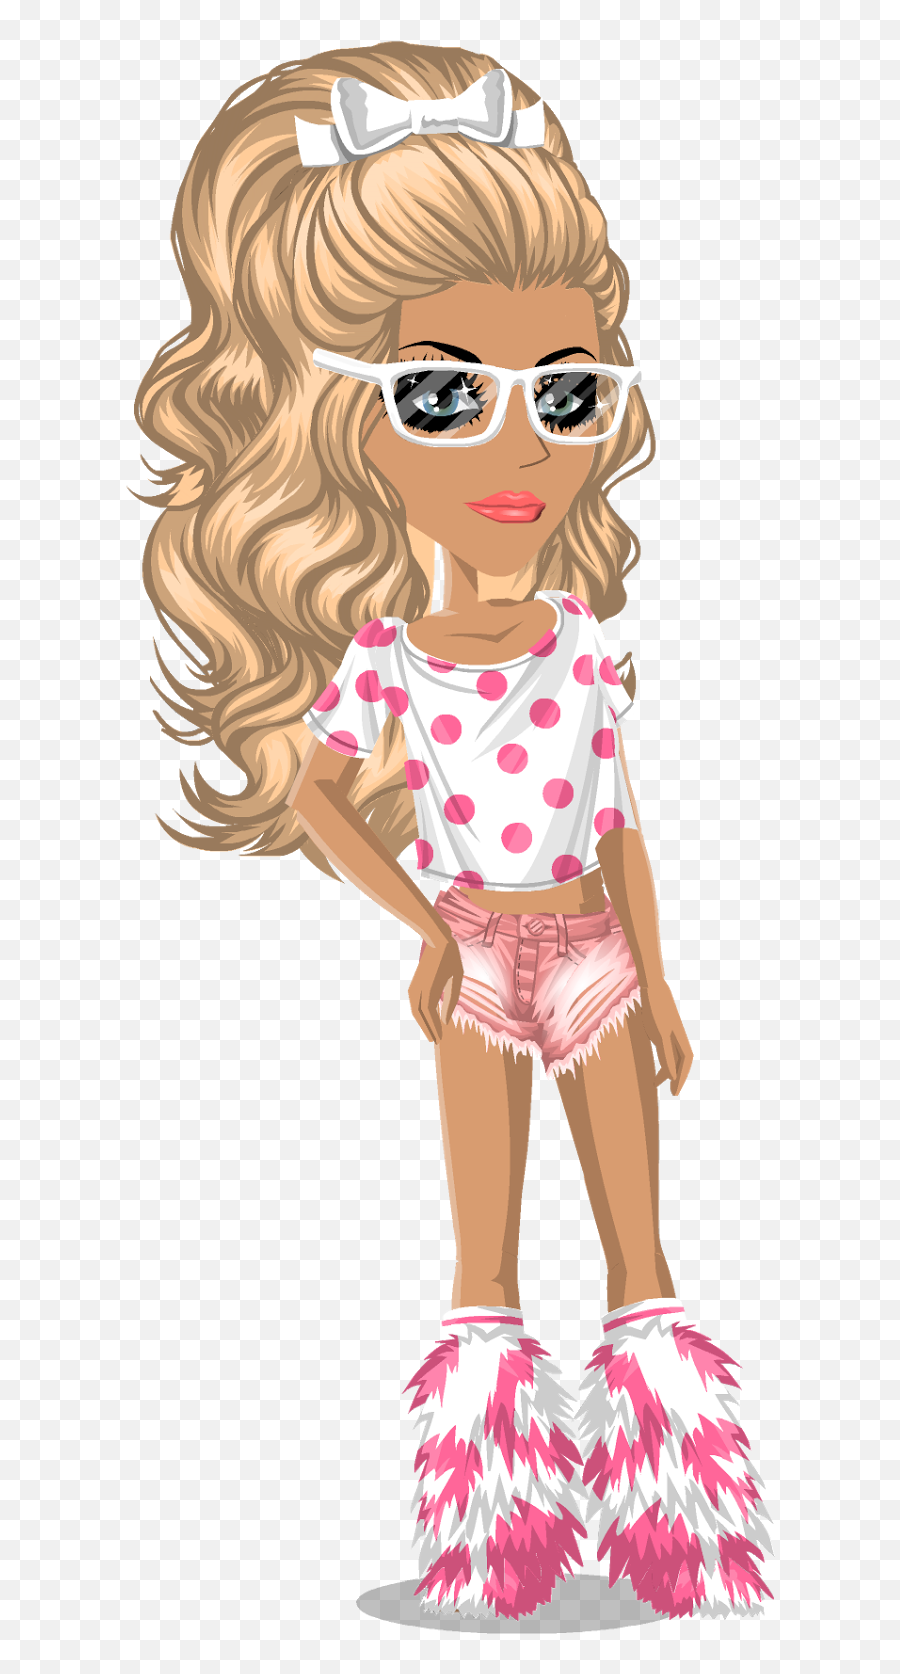 Msp Vip Fille Magnifique Emoji,How To Use The Emojis That Are For Diamonds On Msp